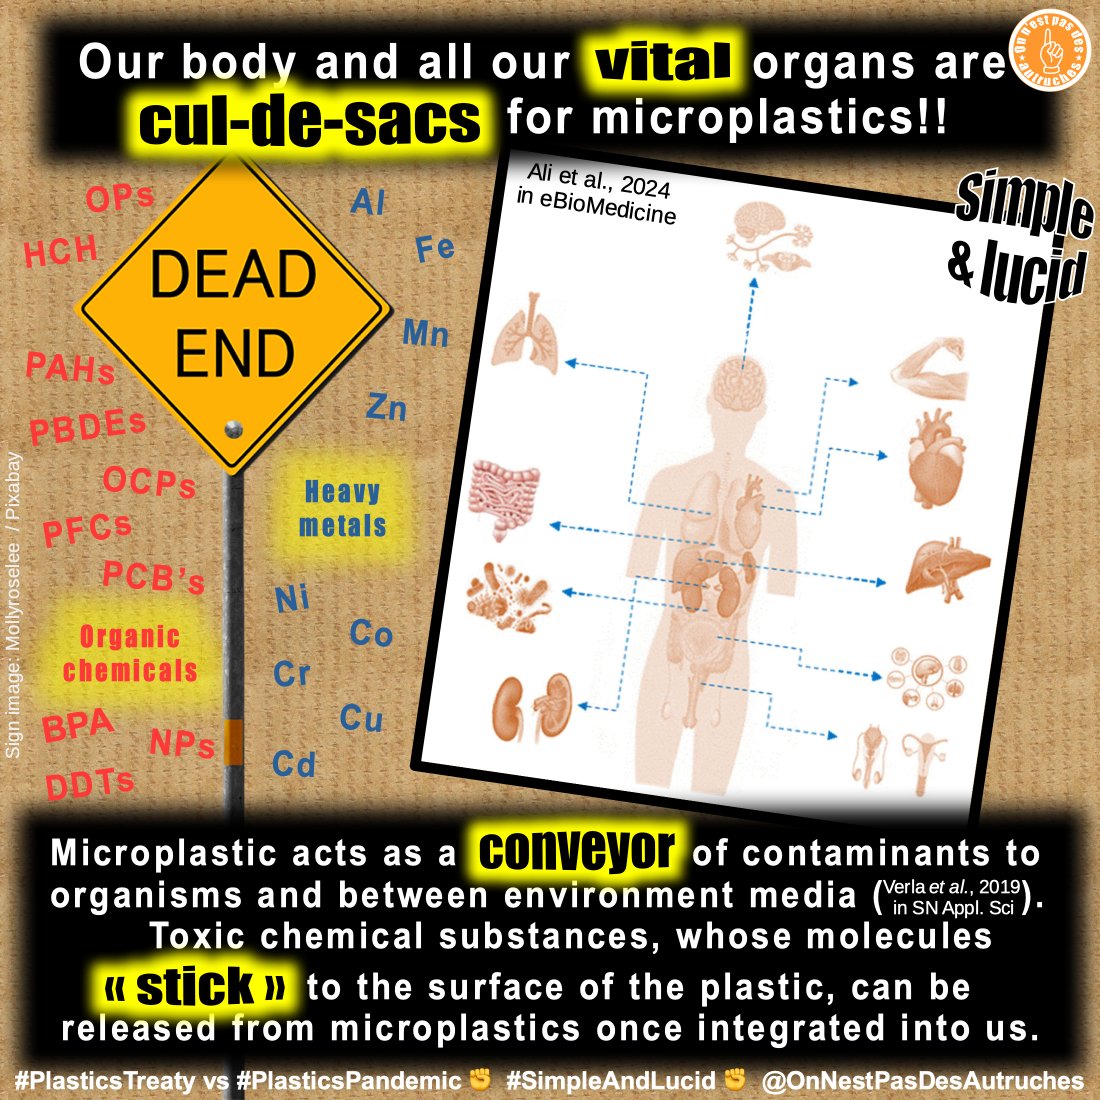 Our body and almost all our vital organs are cul-de-sacs for #microplastics and #nanoplastics!! And these particules of #plastics act as conveyors of contaminants to organisms and between environment media. Toxic chemical substances (organic chemicals, heavy metals,...), whose…